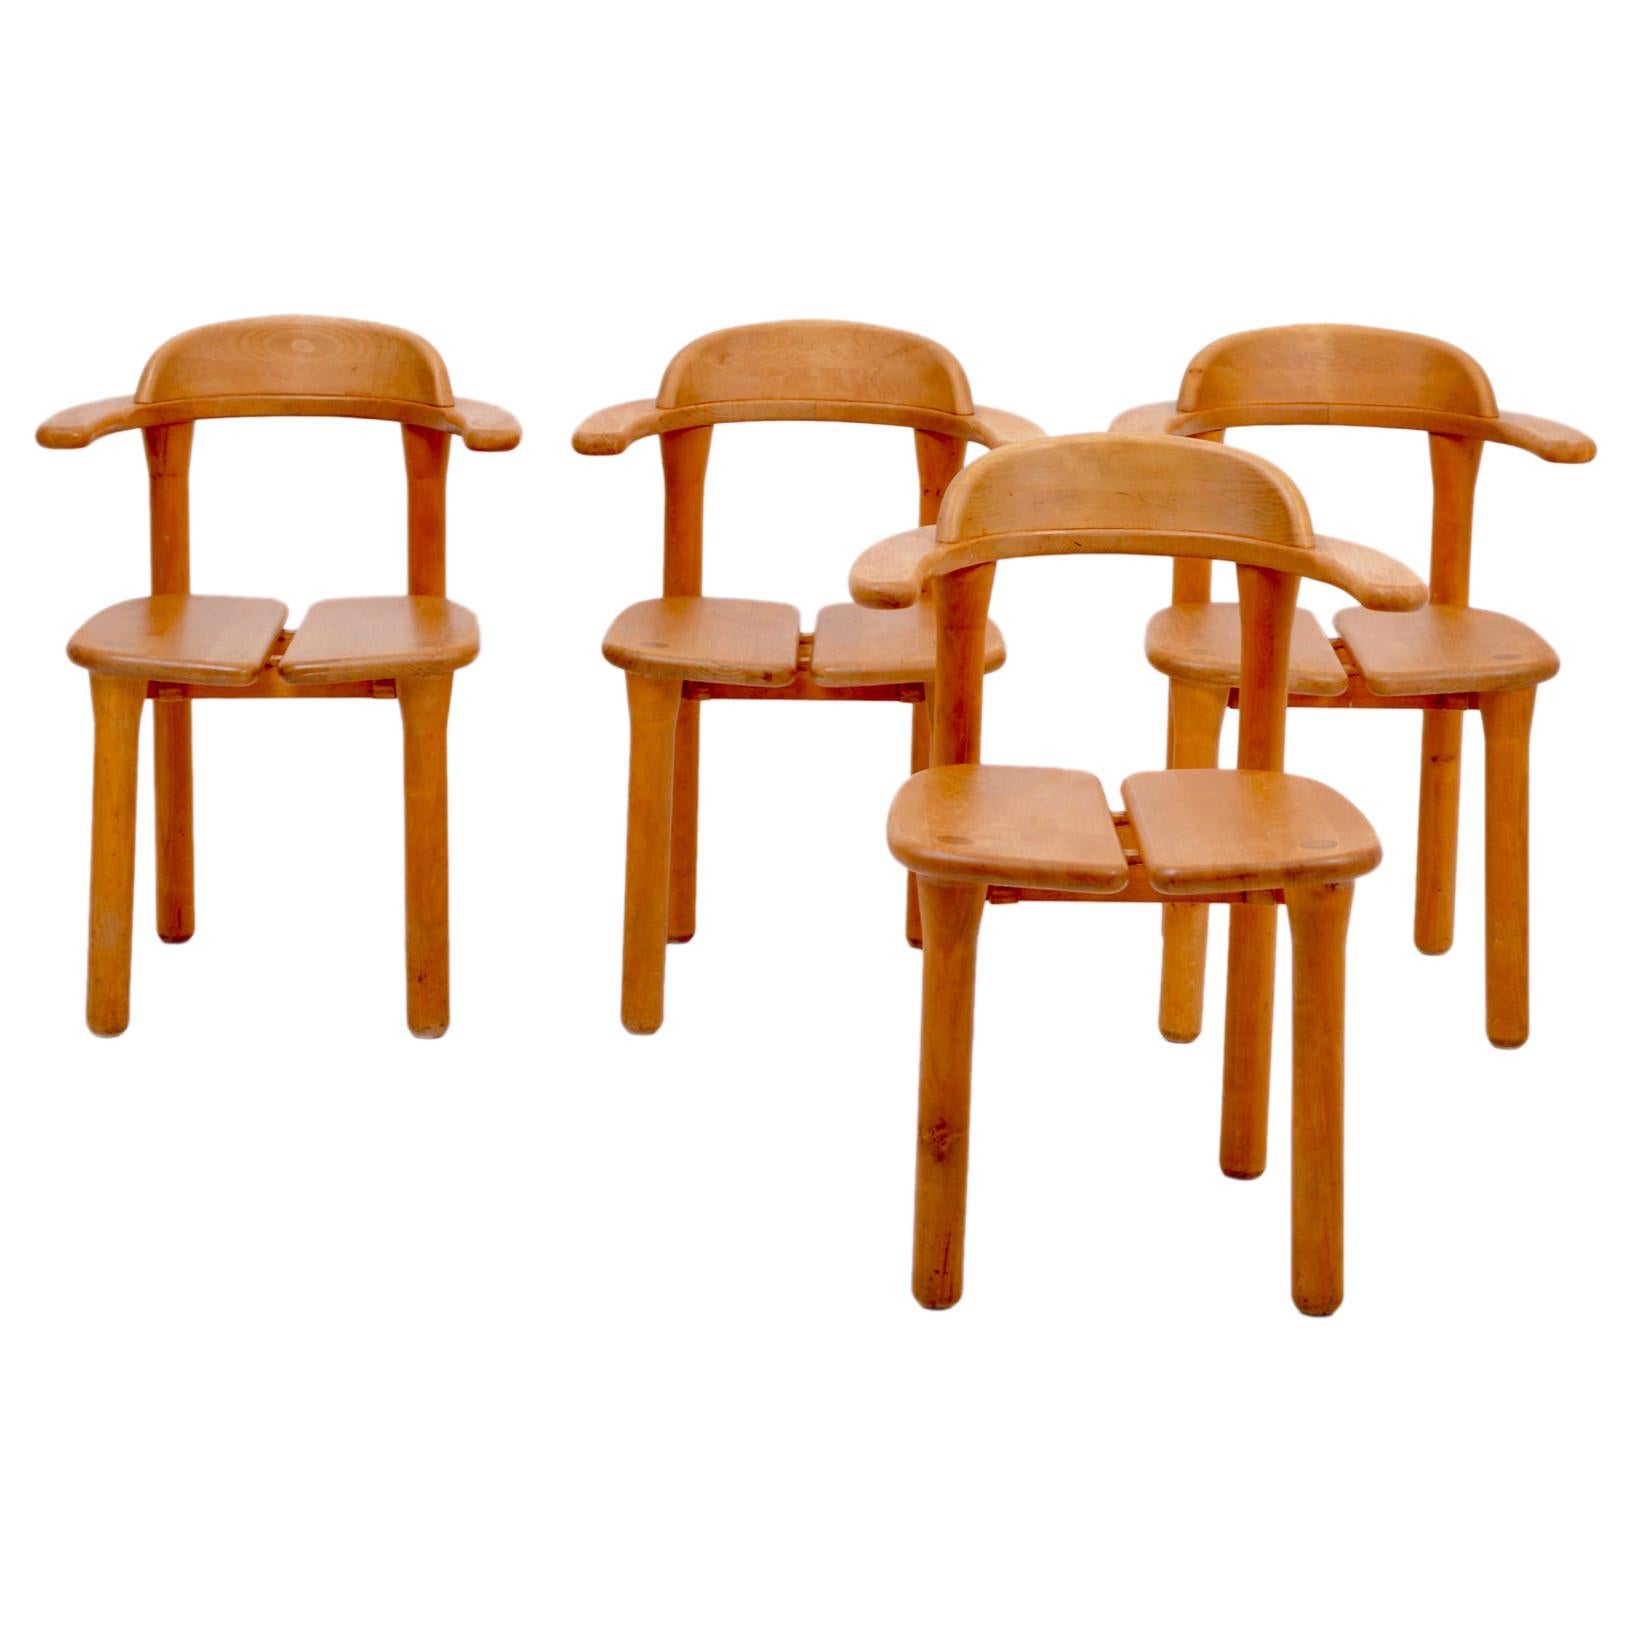 Set of Four Rustic Scandinavian Mid-Century Modern Dining Chairs For Sale